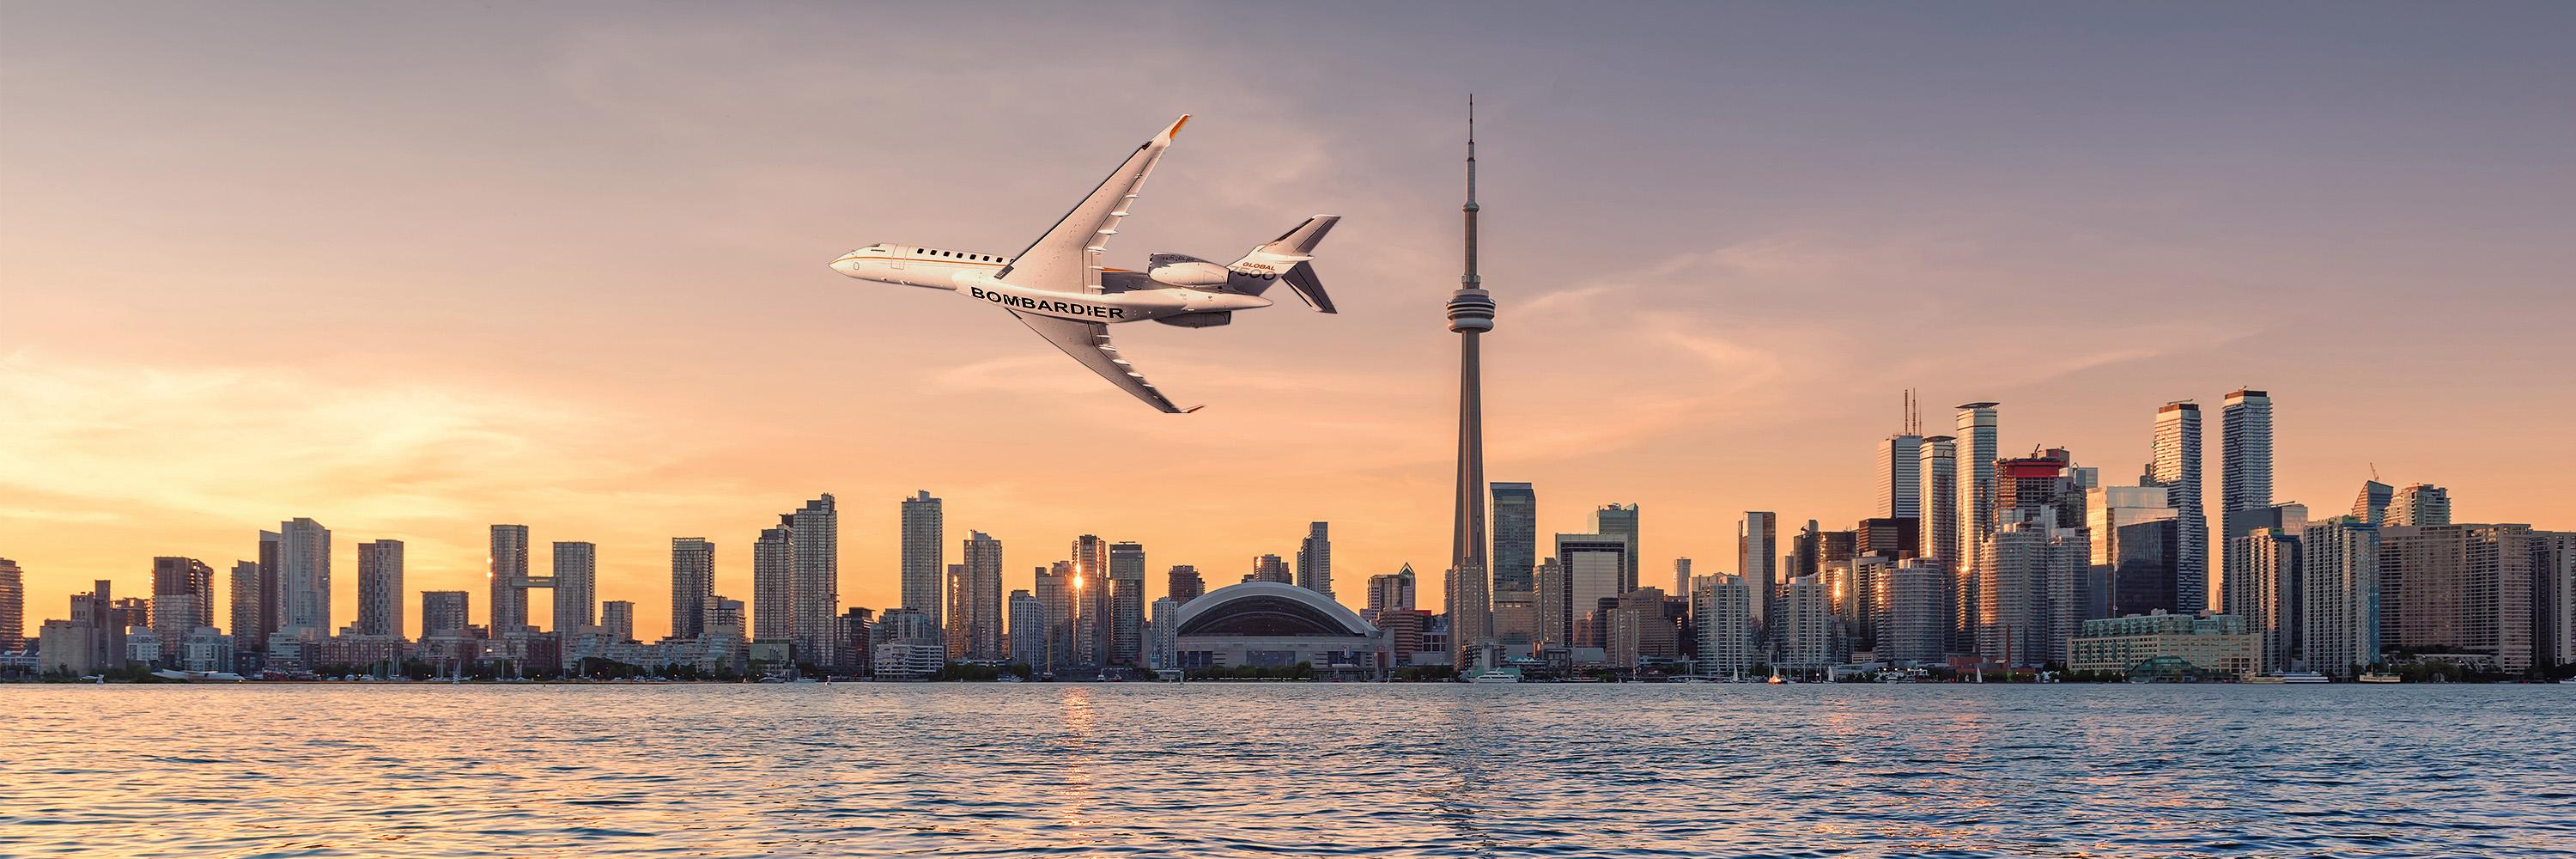 aircraft flying over Toronto city landscape